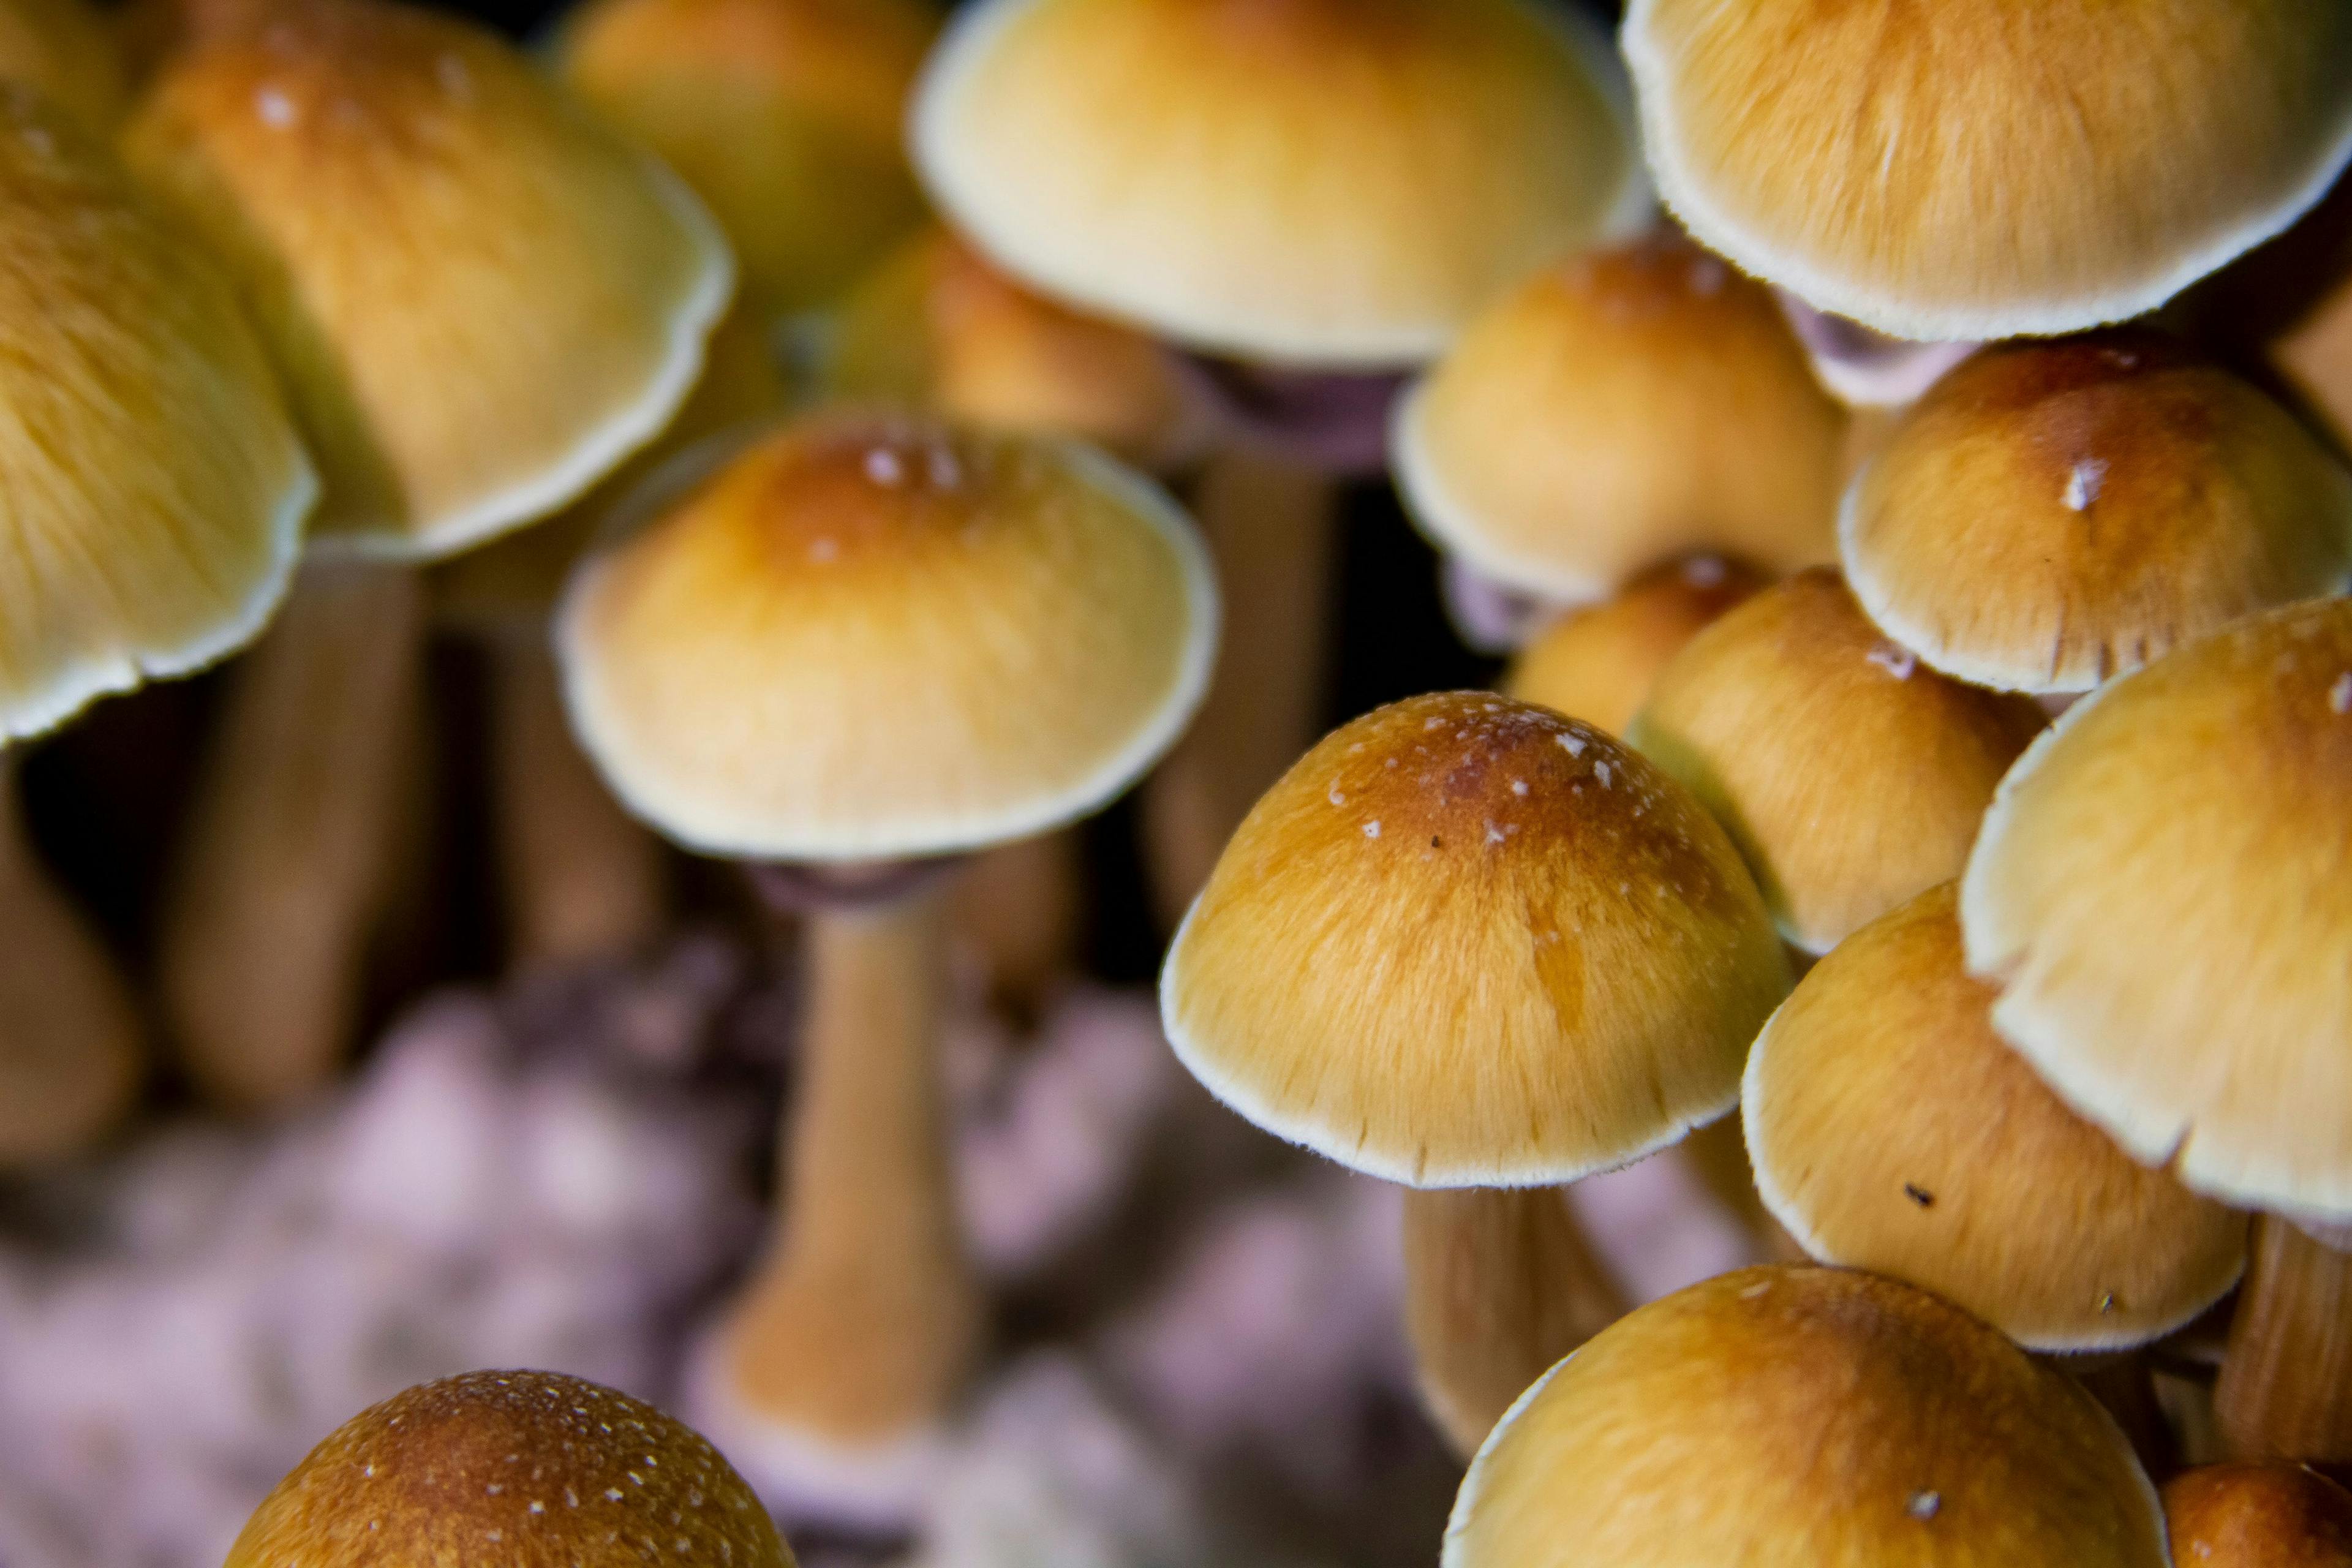 Is psilocybin a viable treatment for MDD? Researchers performed a phase 2, double blind trial of single-dose psilocybin in patients with treatment resistant depression.